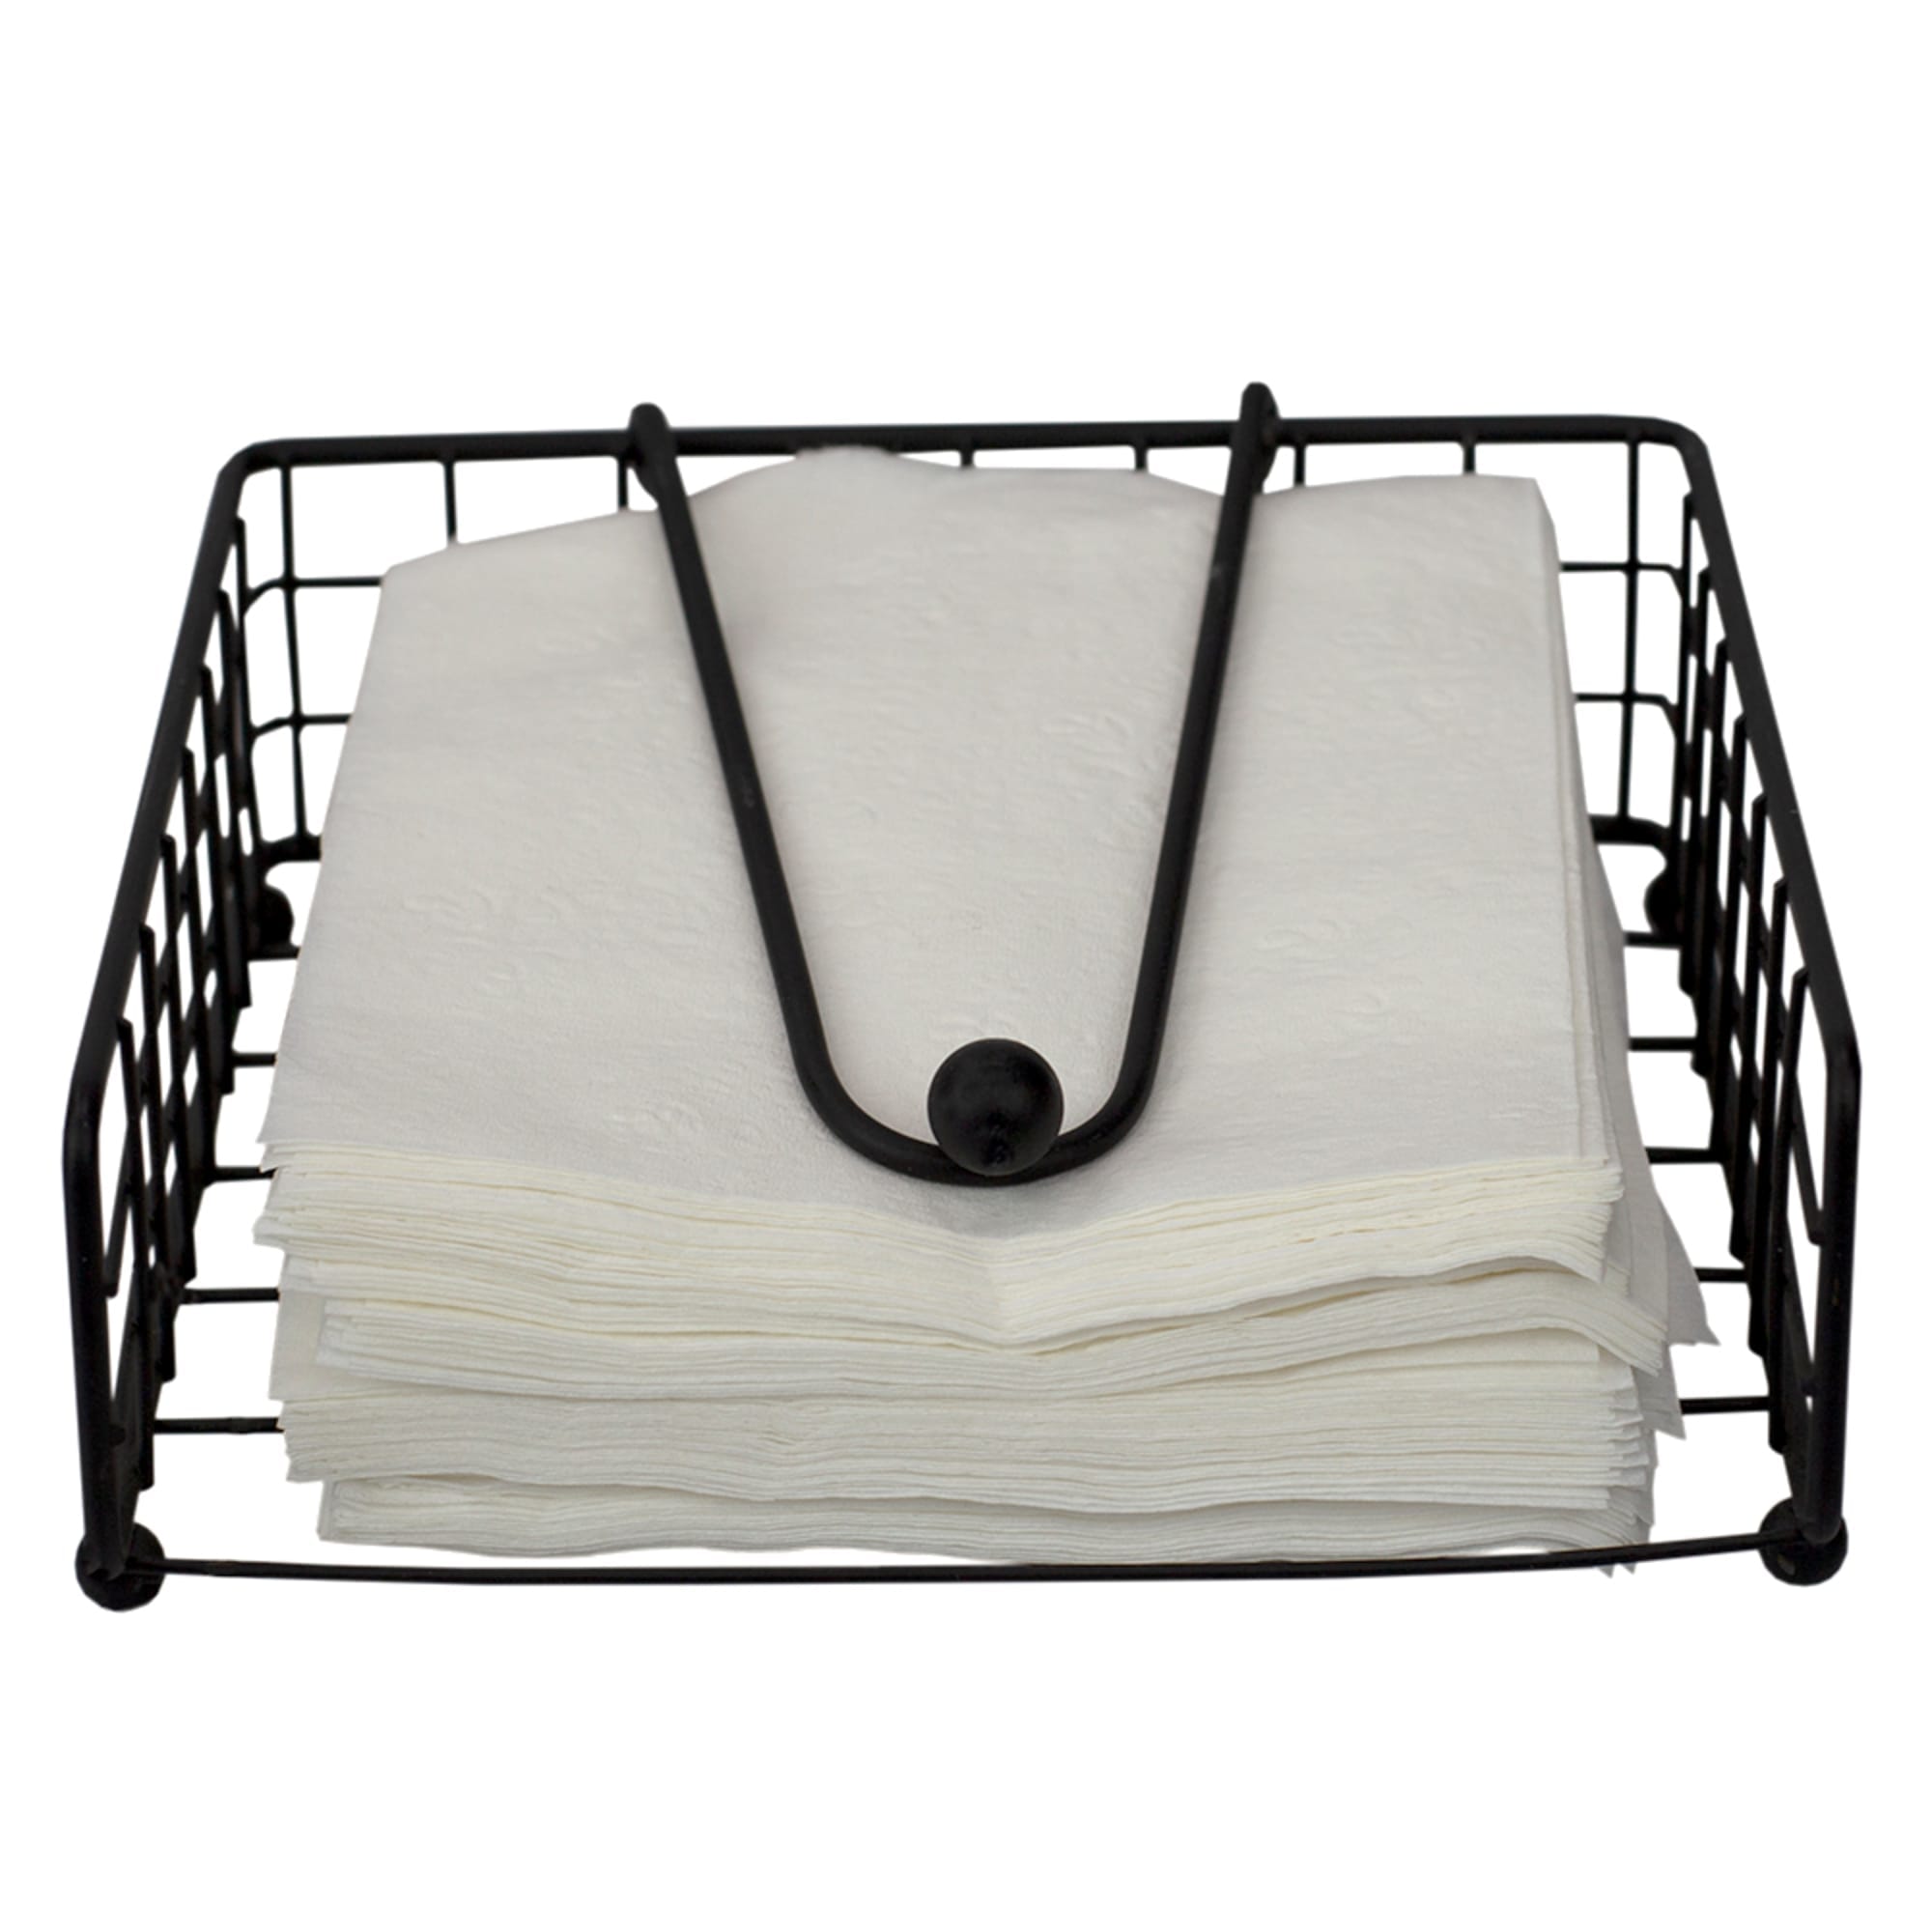 Home Basics Grid Collection Napkin Holder with Weighted Pivoting Arm, Black $4.00 EACH, CASE PACK OF 12